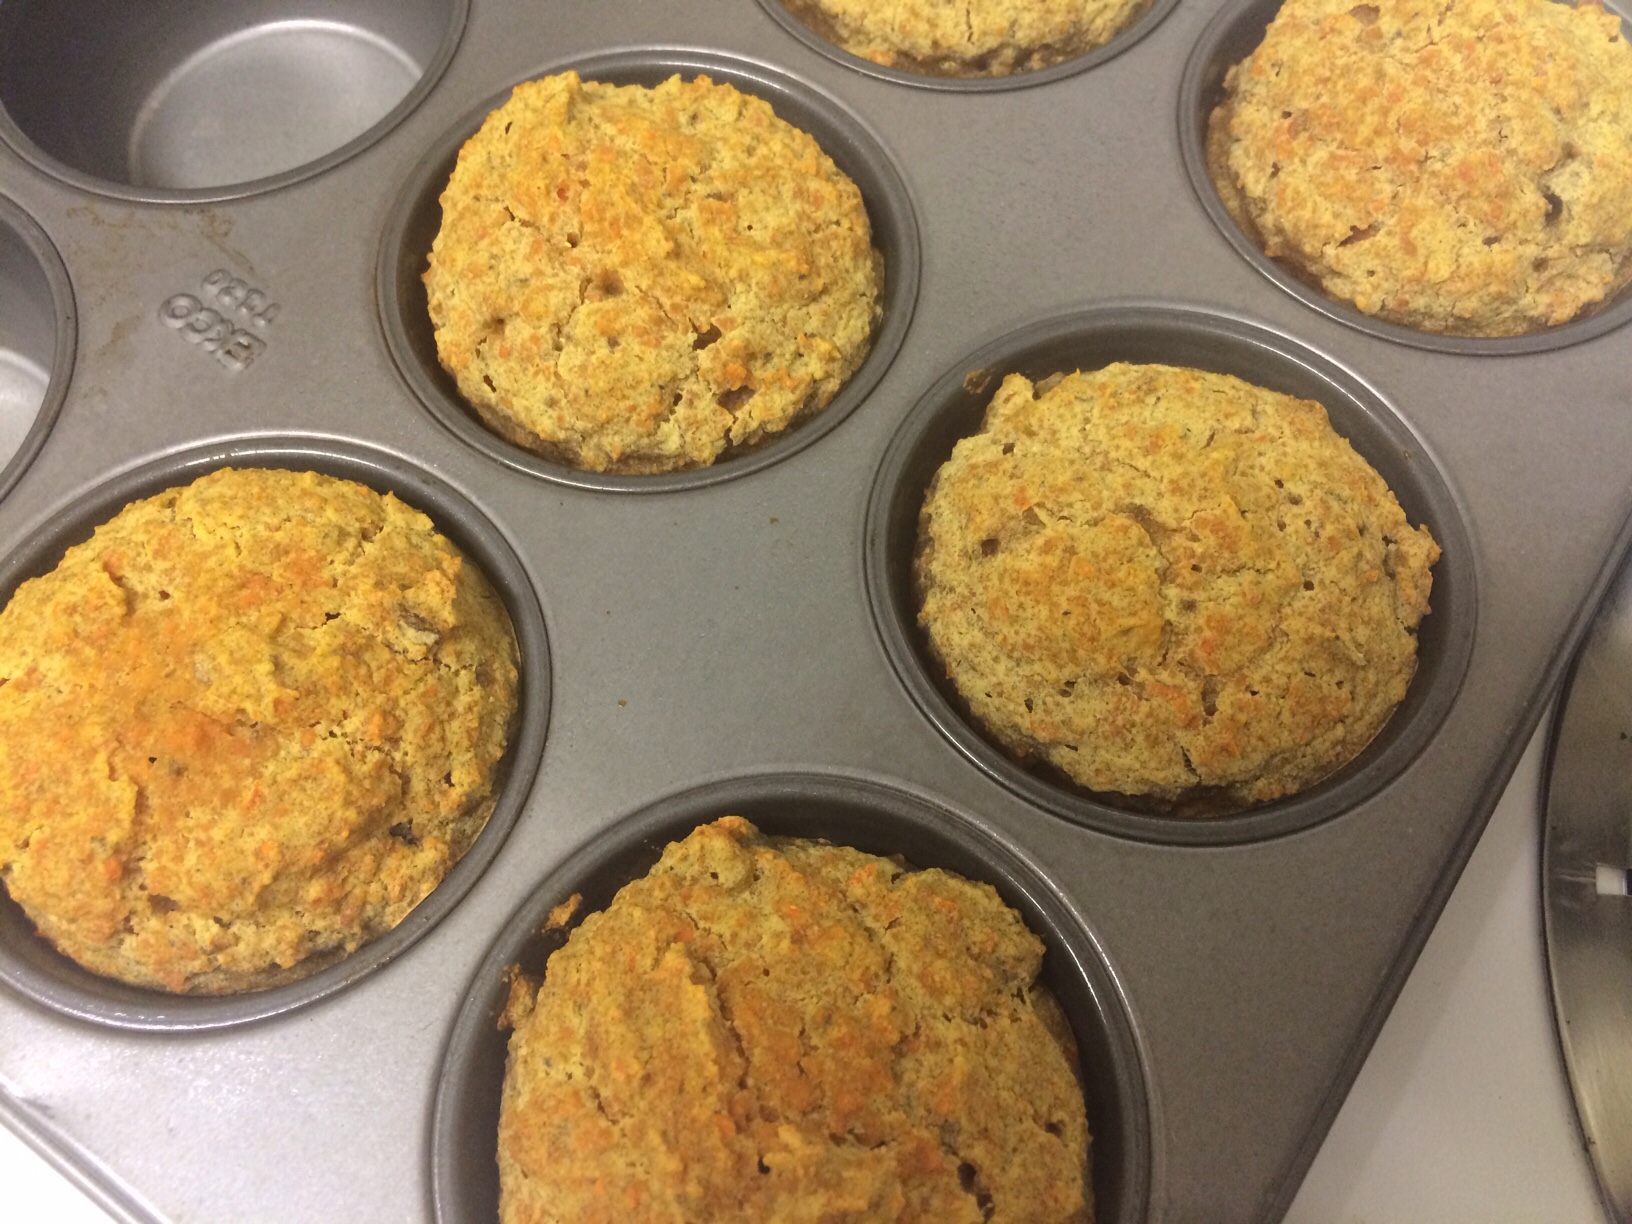 Carrot and prune muffins